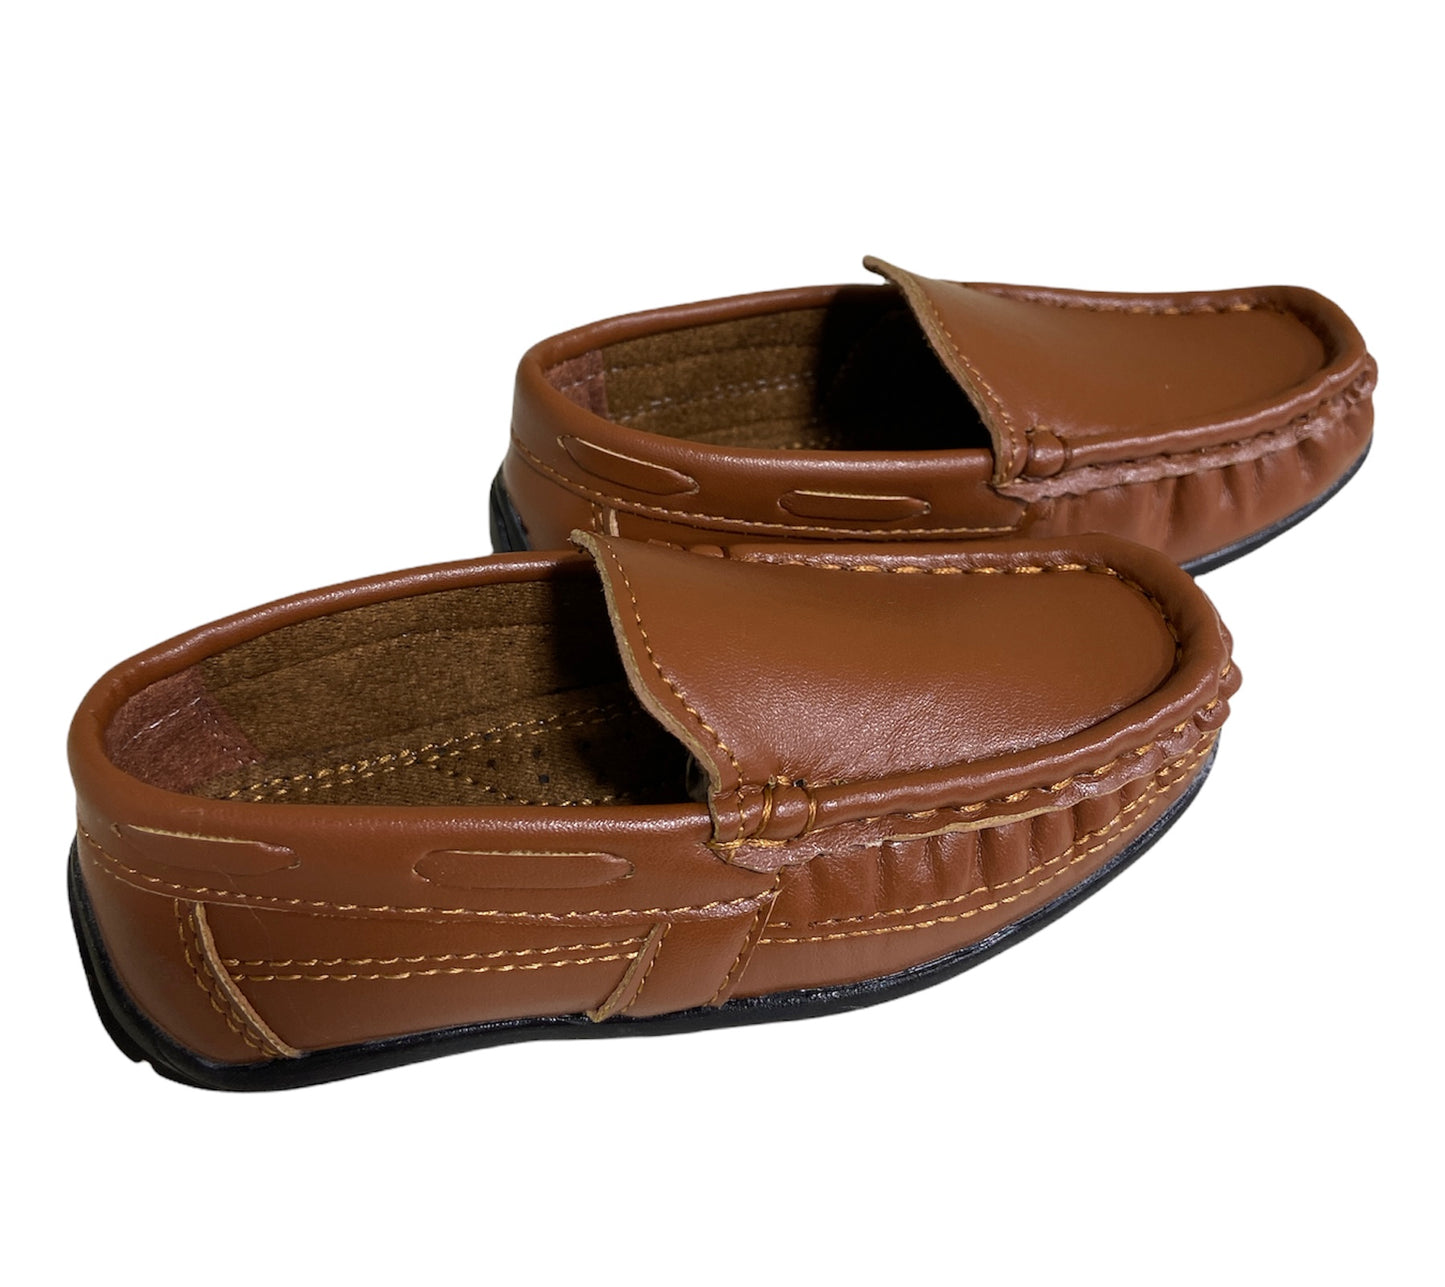 Tan Boys Casual Loafer Shoe